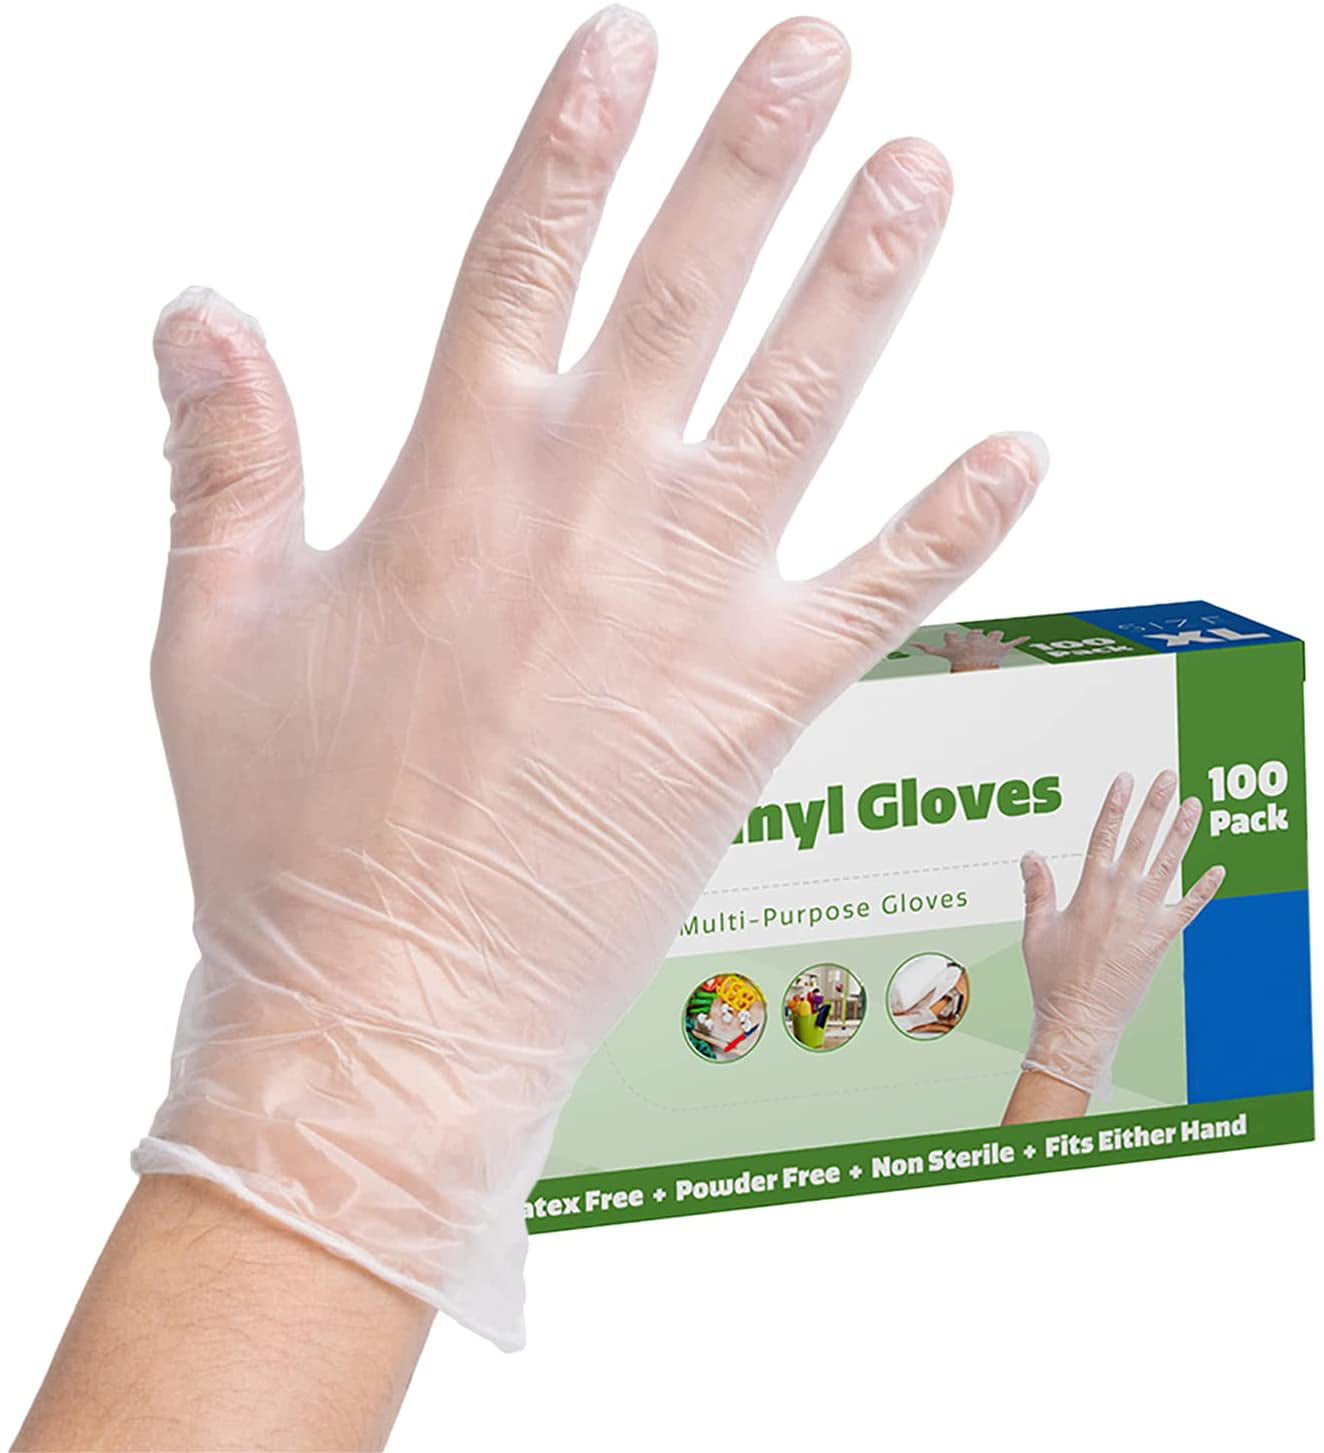 Vinyl Gloves Latex and Powder Free Comfortable Disposable Gloves 